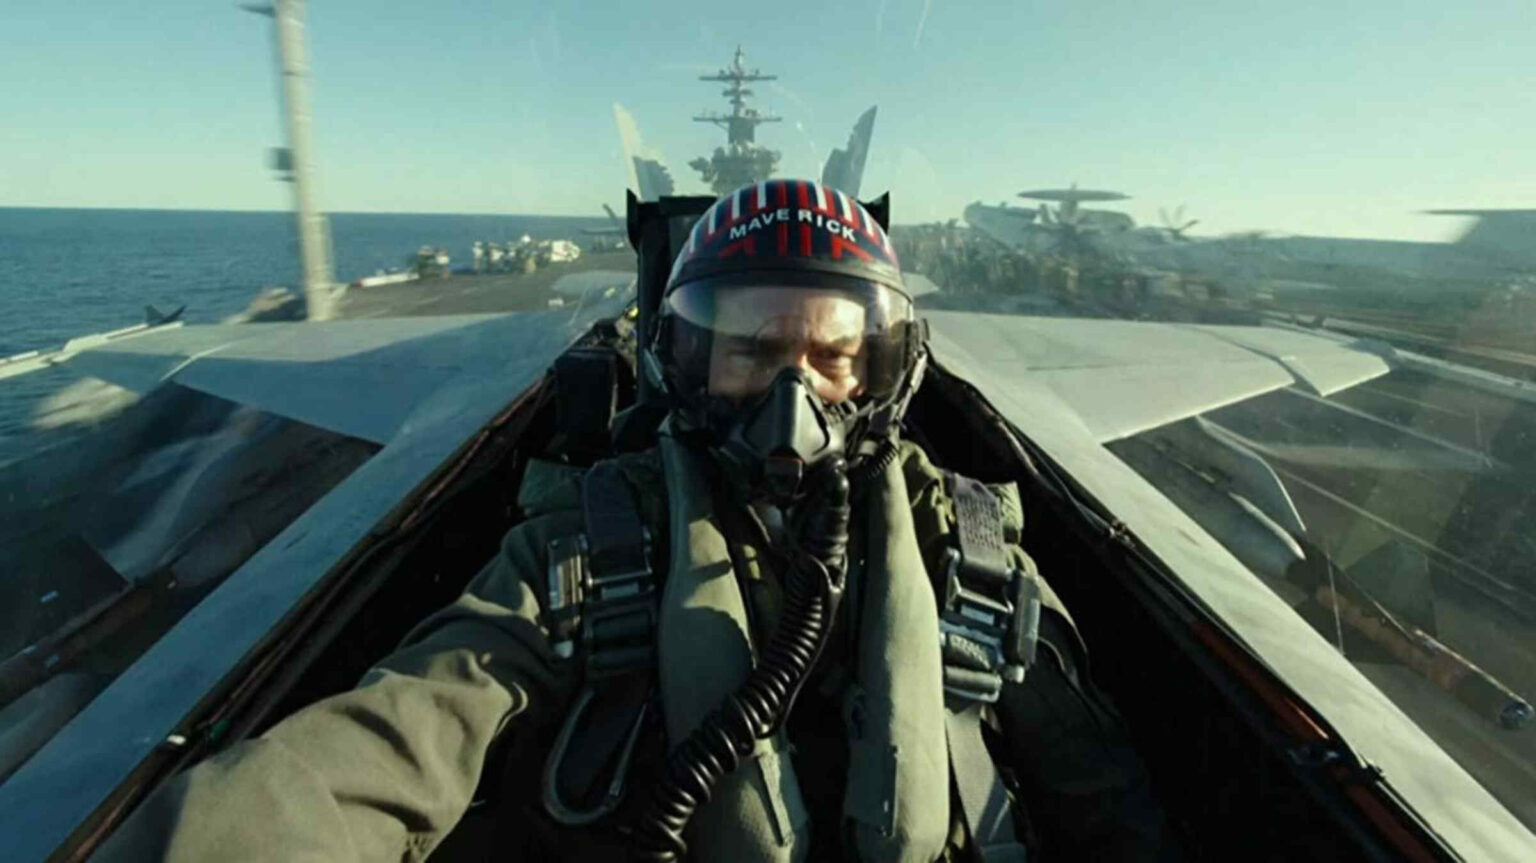 Top Gun: Maverick is finally here. Find out where to stream anticipated Tom Cruise Adventure movie Top Gun 2 online for free.